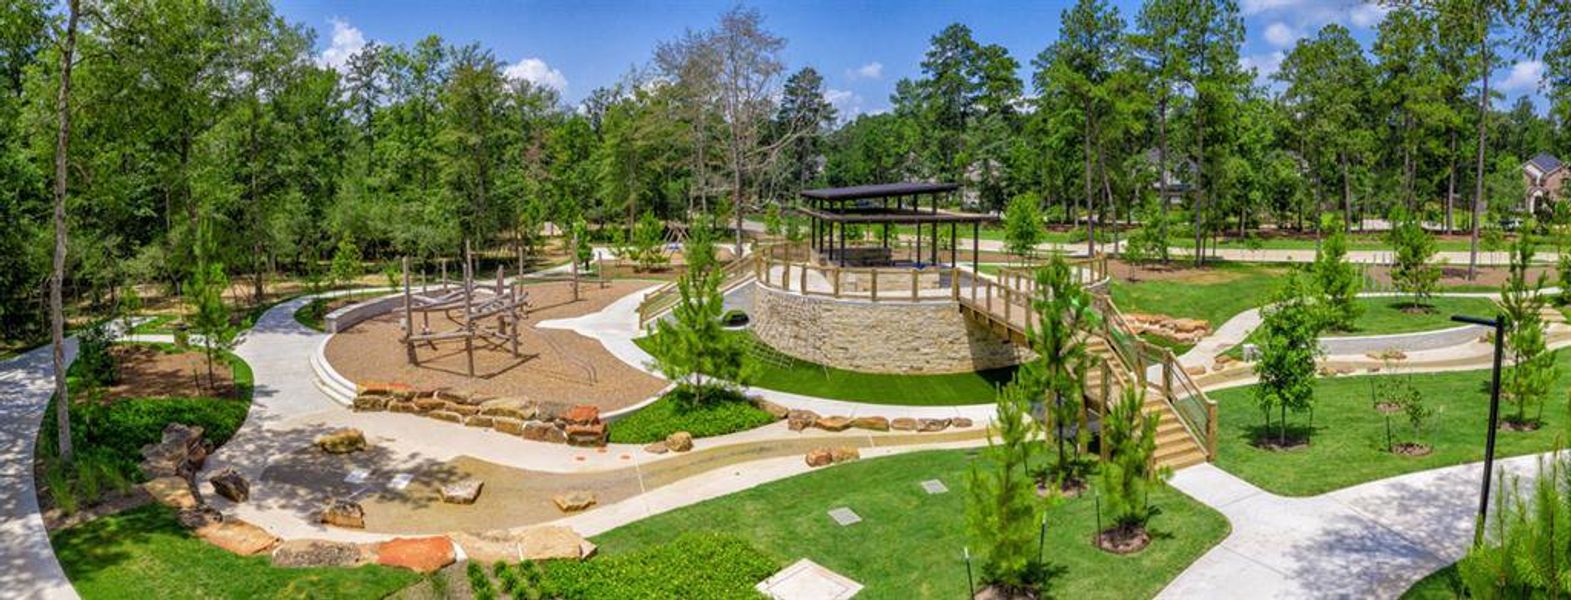 The Woodlands Hills is a 2,000-acre forested master planned community, featuring 112 acres of open space, 20 neighborhood parks, and a 17-acre Village Park. The community will also include an extensive amount of trails for hiking and biking, in addition to dedicated bike lanes.